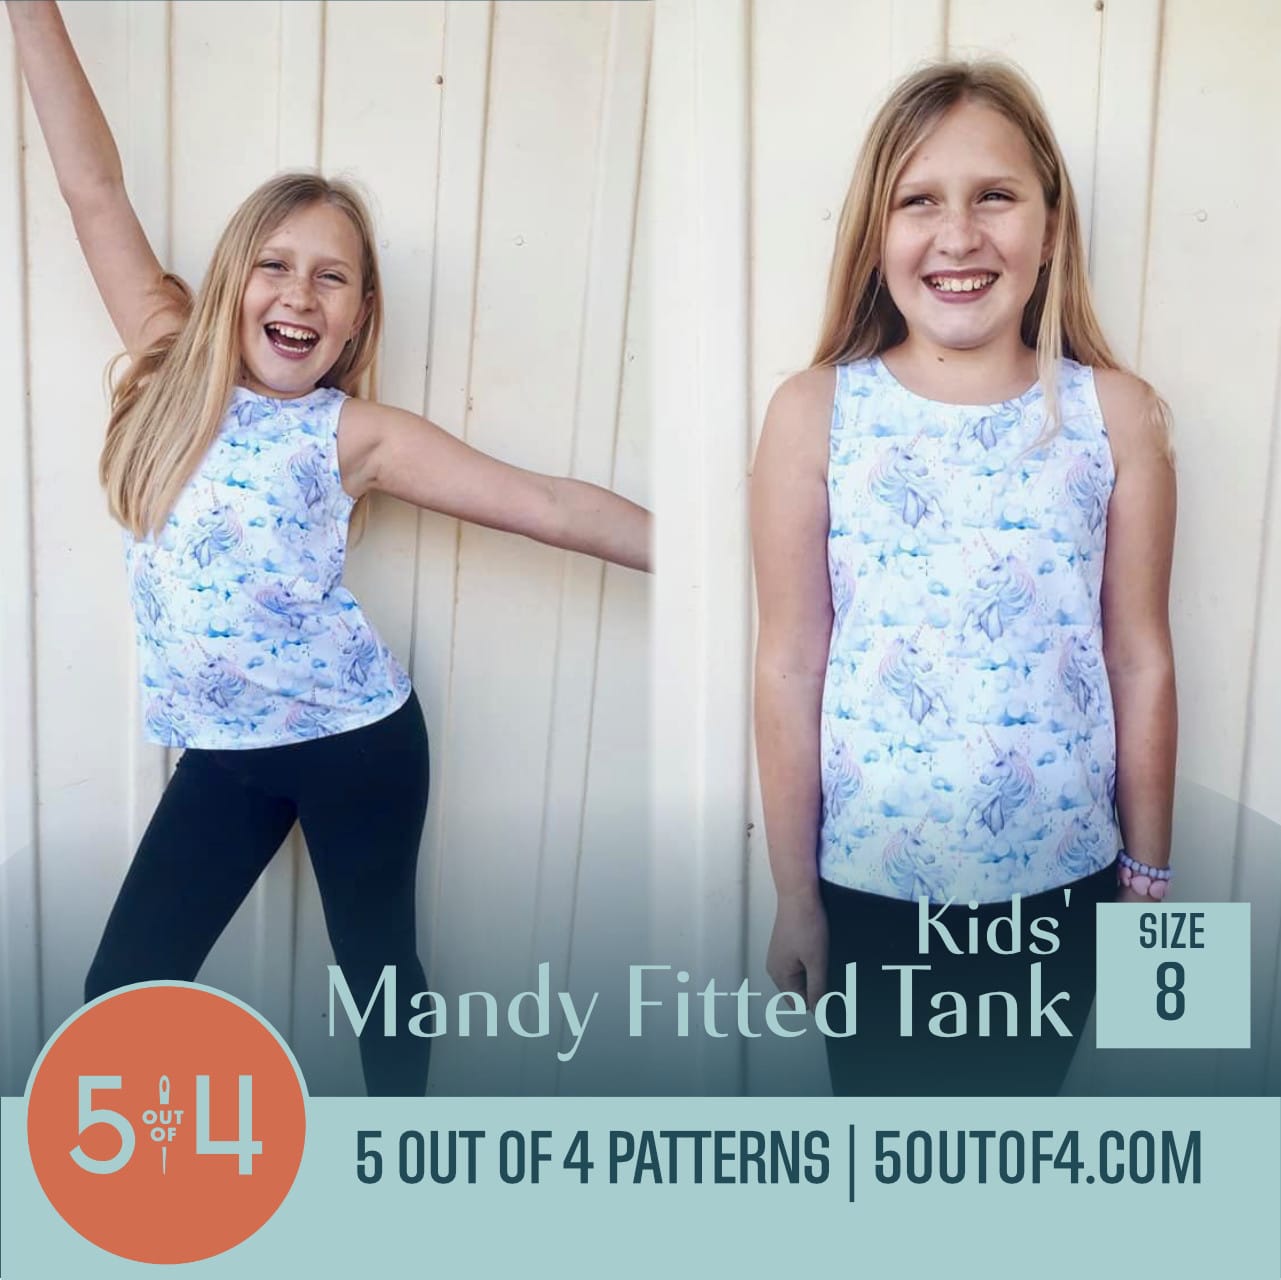 Kids' Mandy Fitted Tank